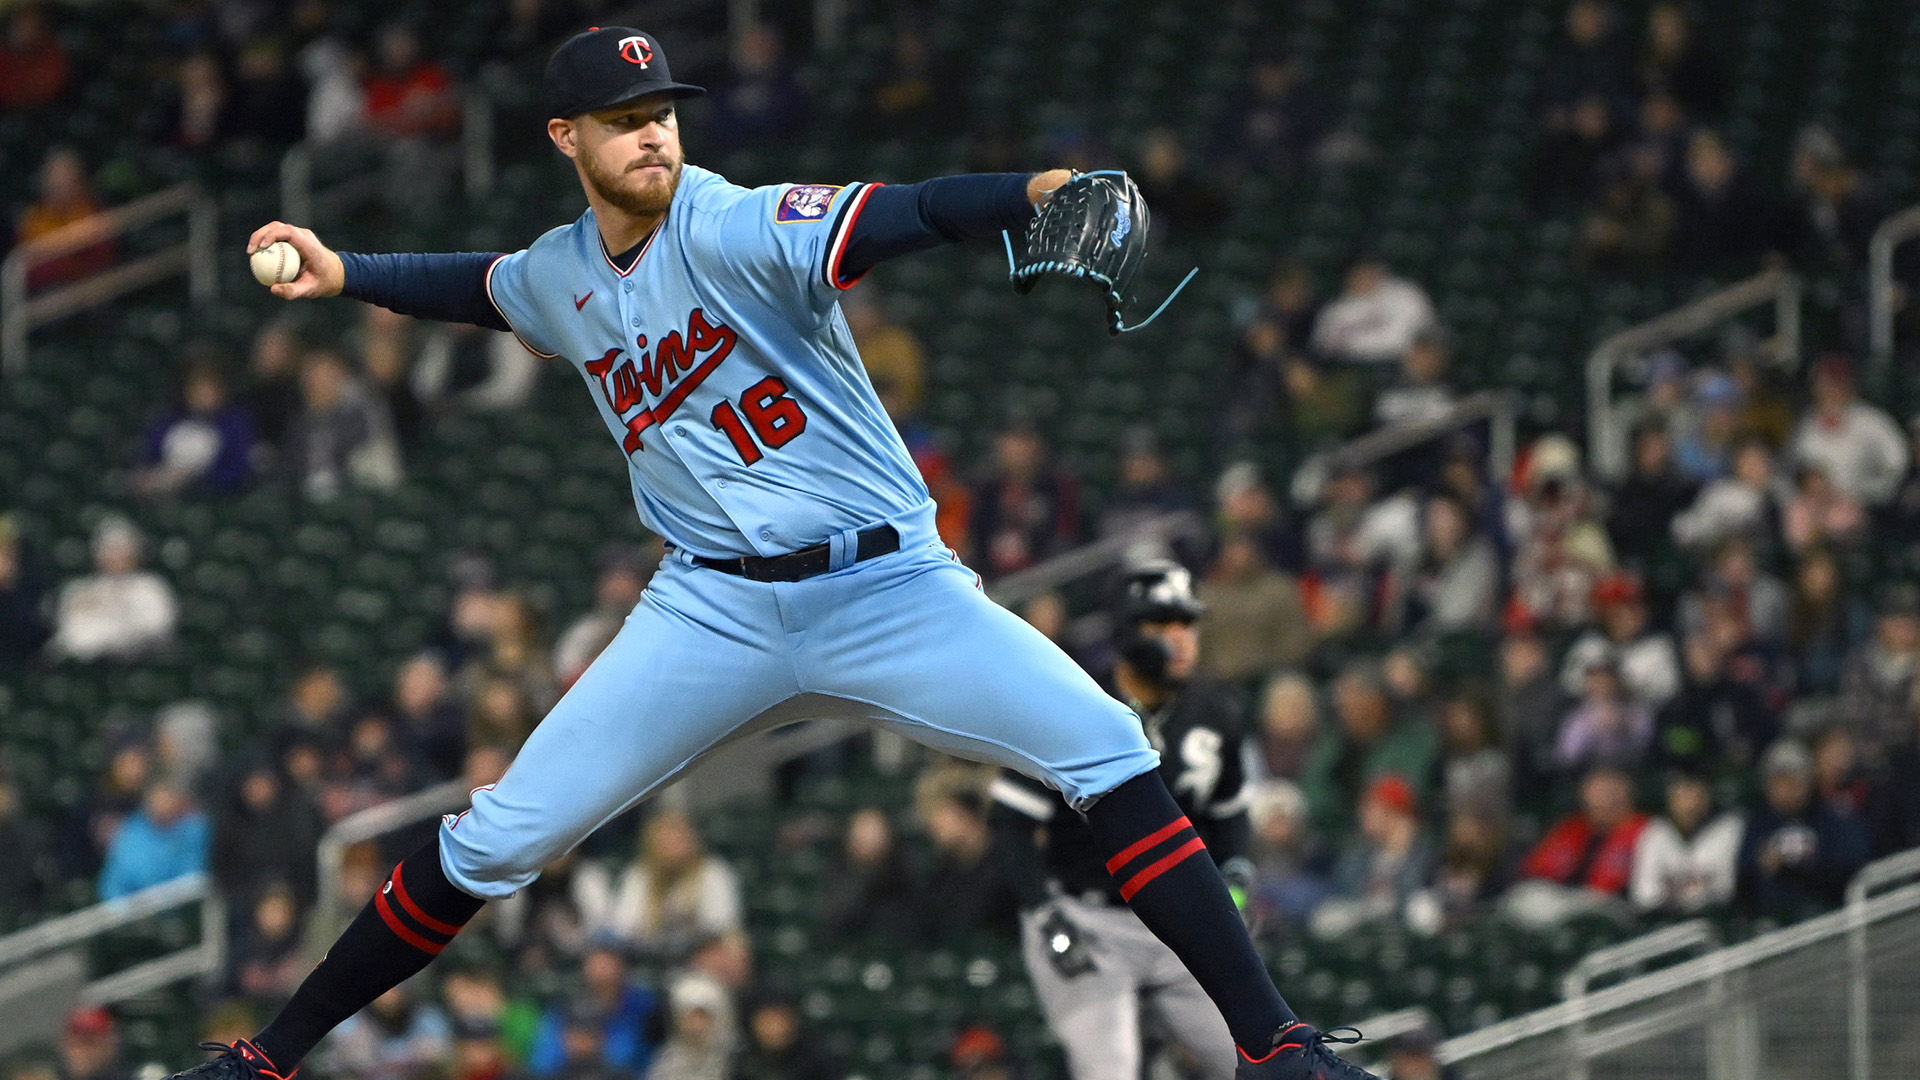 Bailey Ober strikes out 10, Twins shut out White Sox – NBC Sports